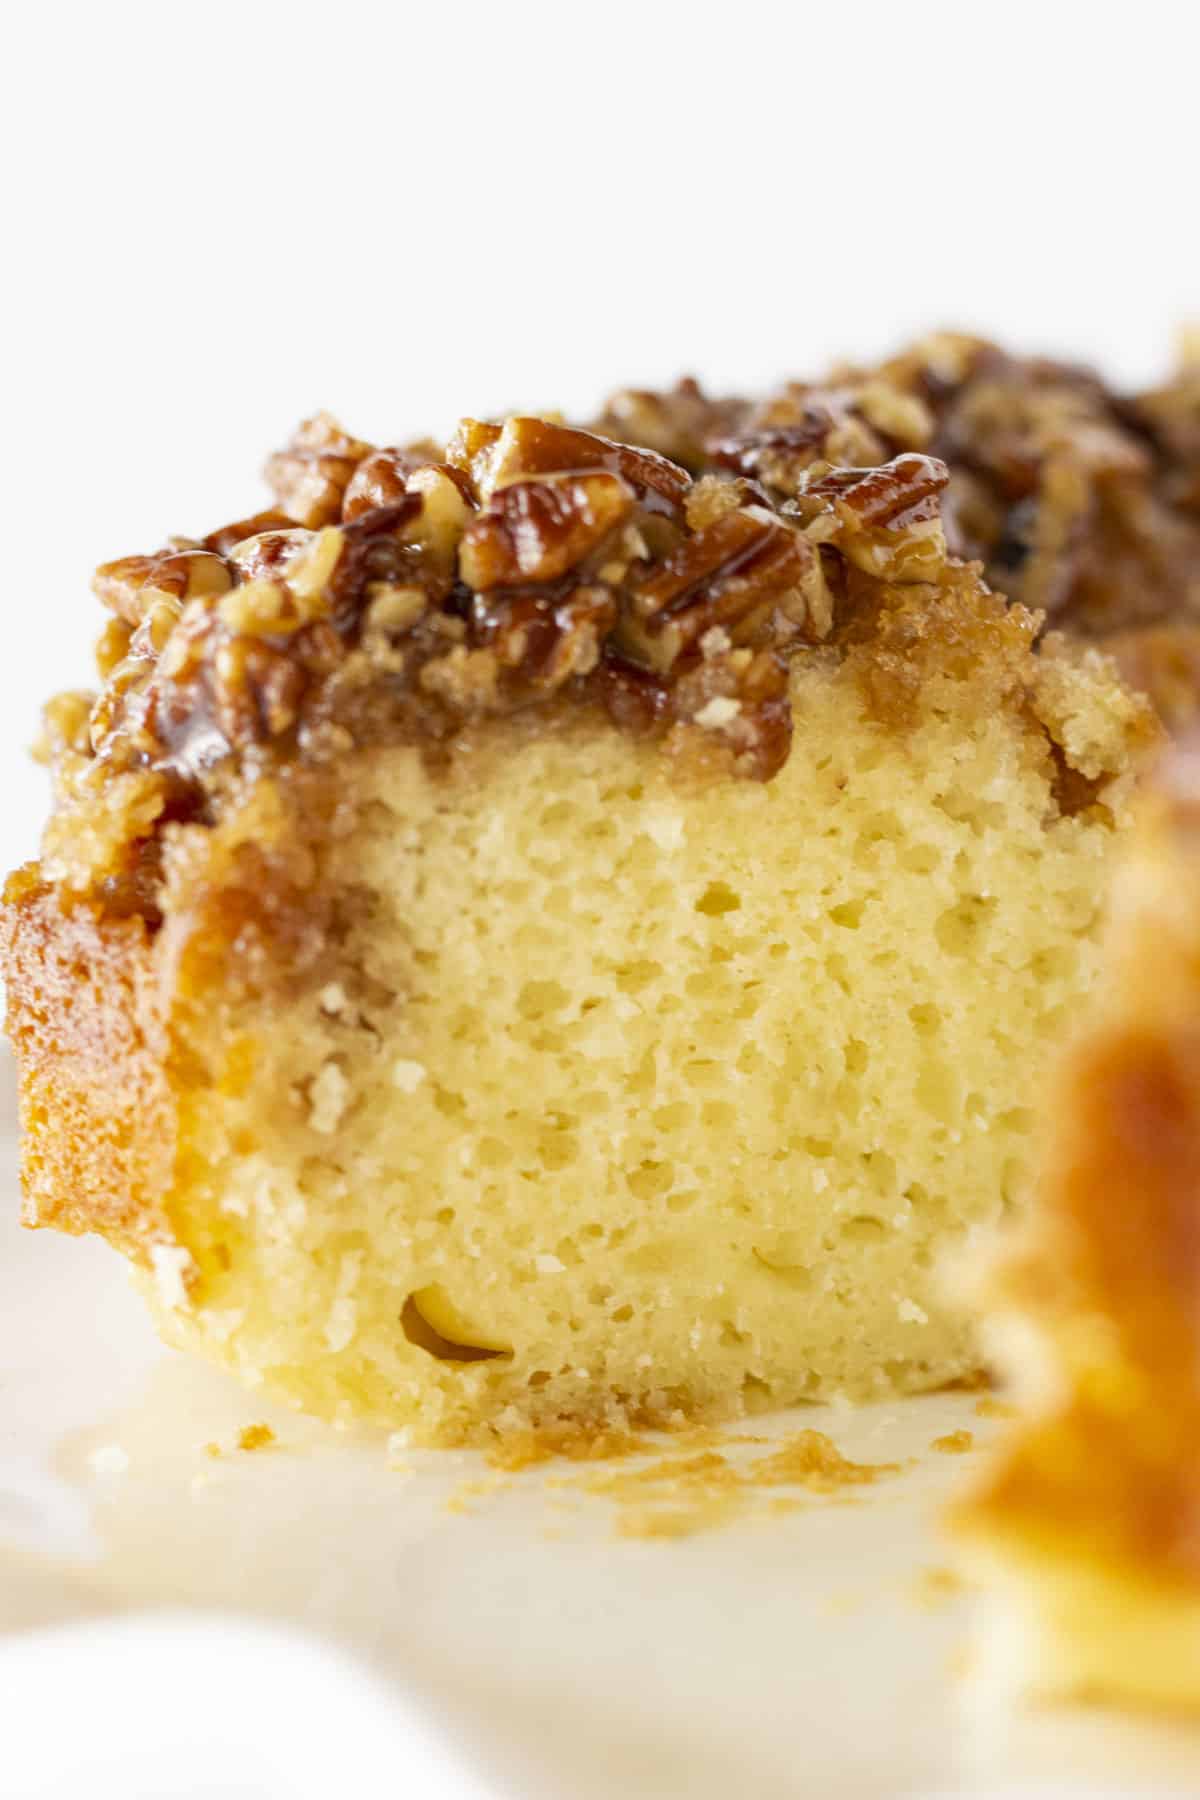 Pecan Upside Down Bundt Cake with a slice taken out.